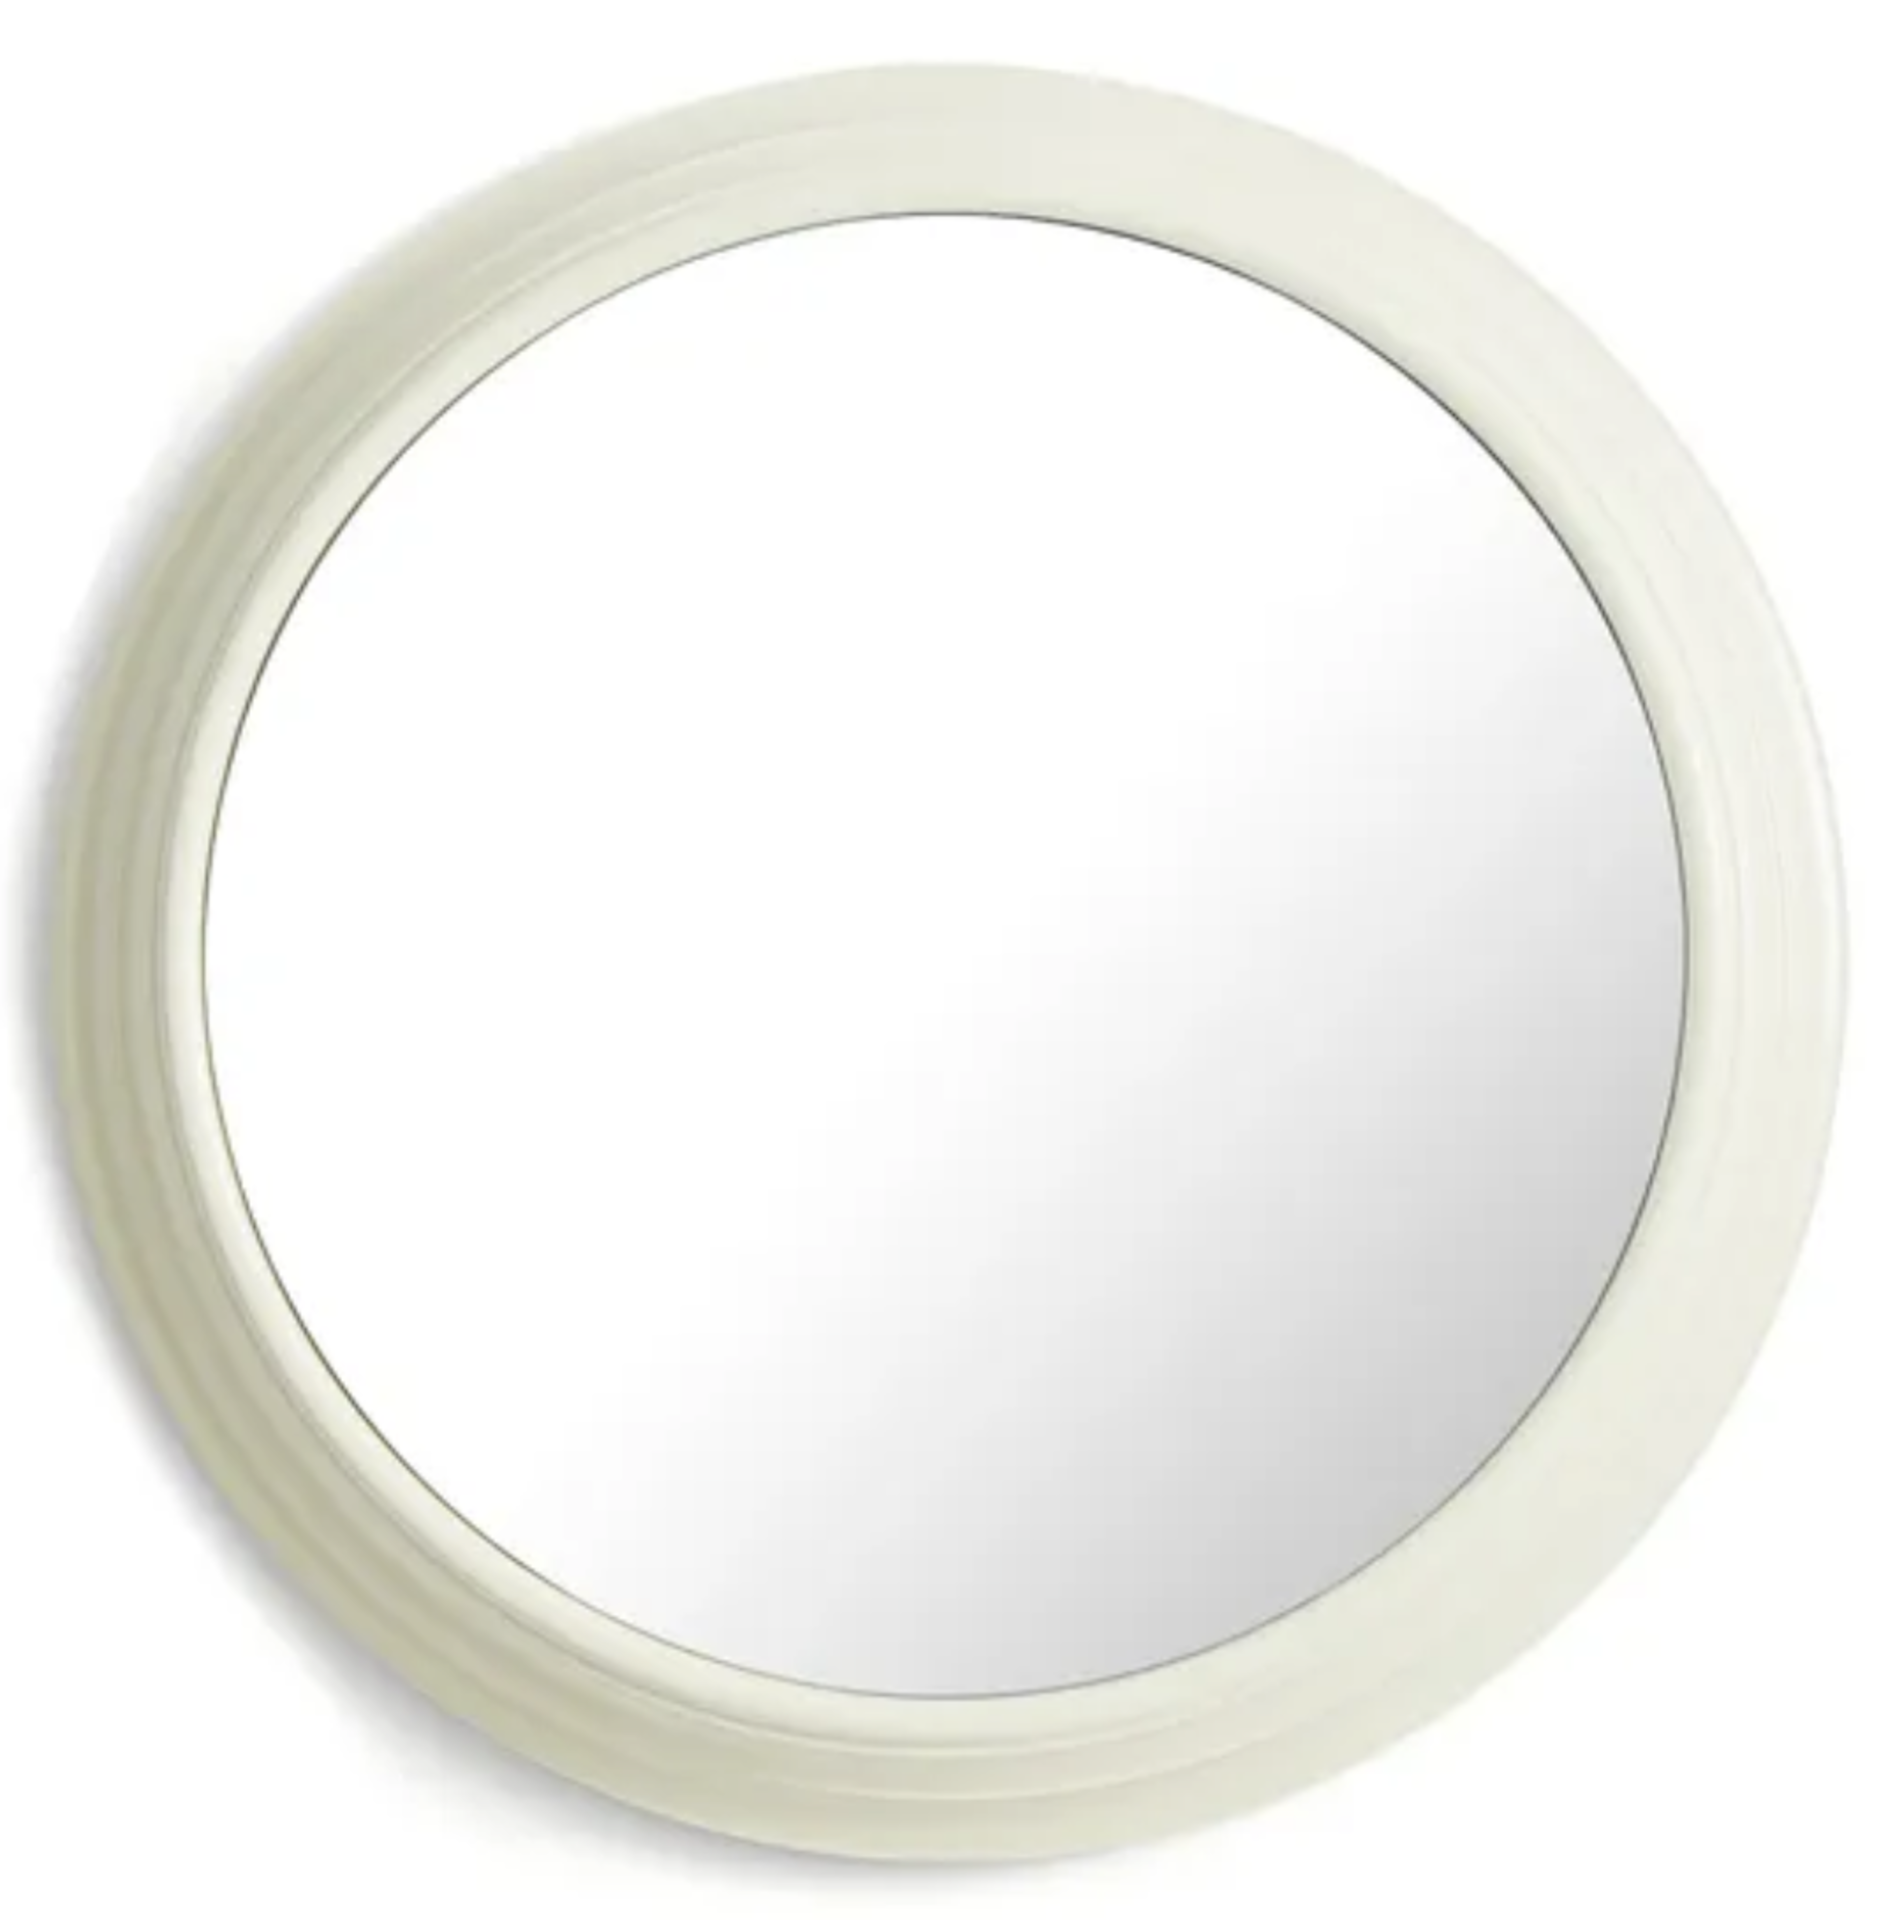 Cream Round 30cm Mirror - Brand New - A contemporary and timeless circular mirror - Image 3 of 3